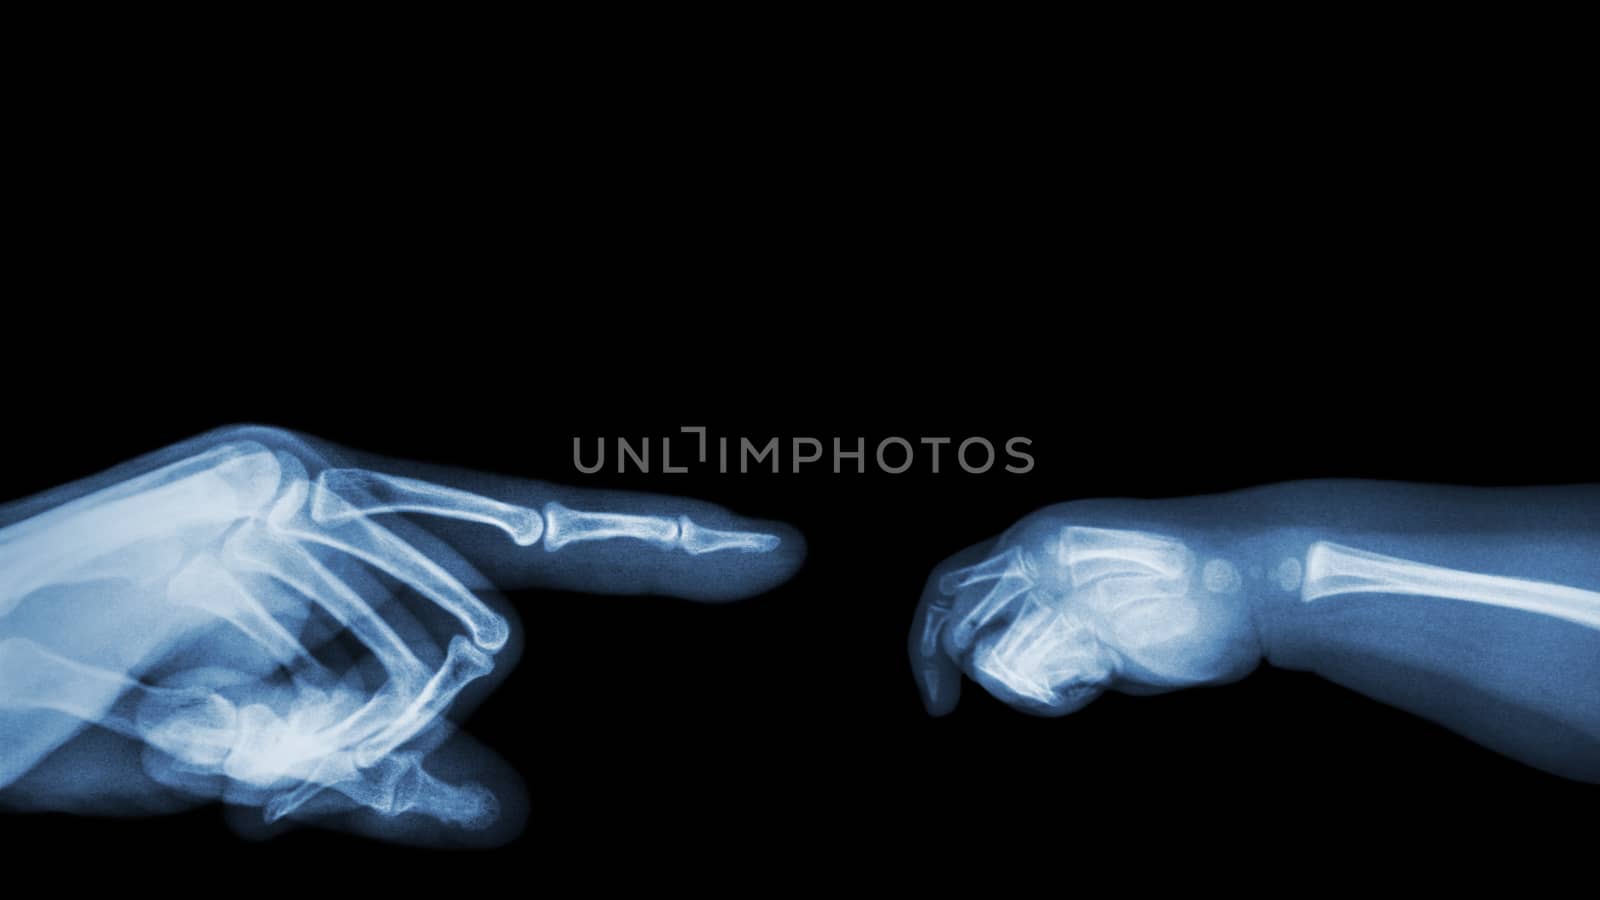 X-ray adult's hand point finger at left side and baby's hand at right side. Blank area at upper side by stockdevil